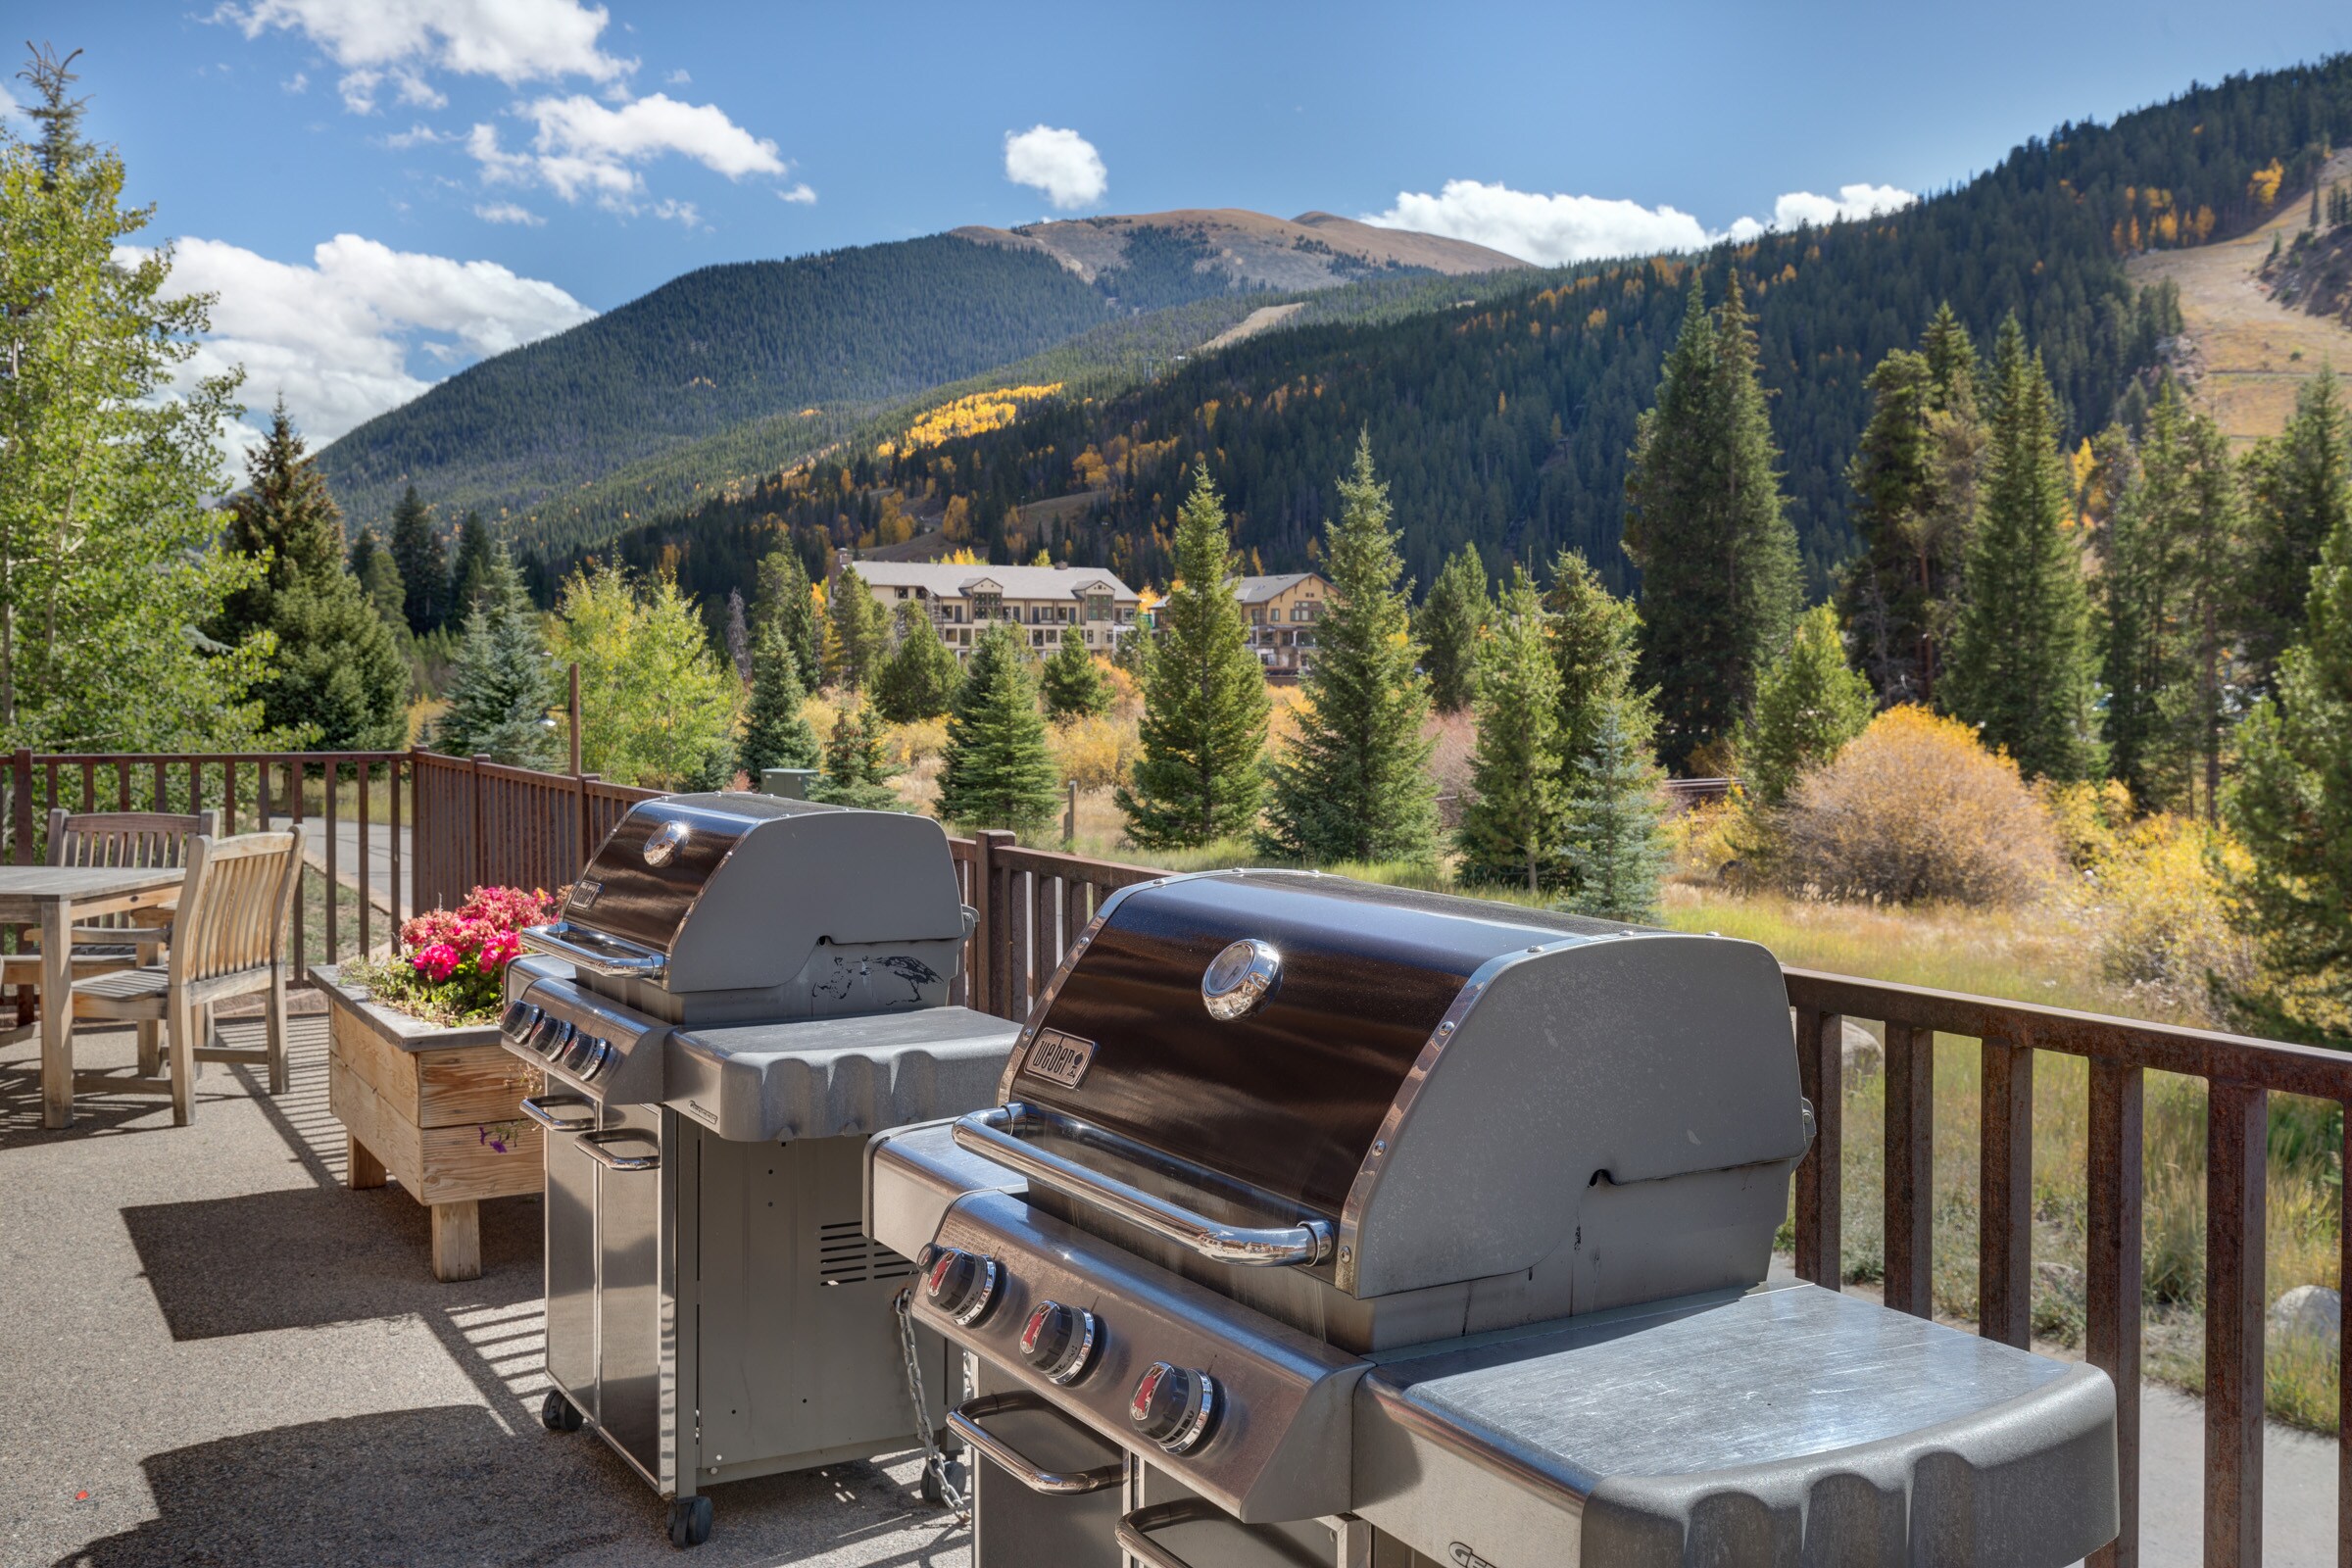 Hidden River Lodge Grills and Mountain Views